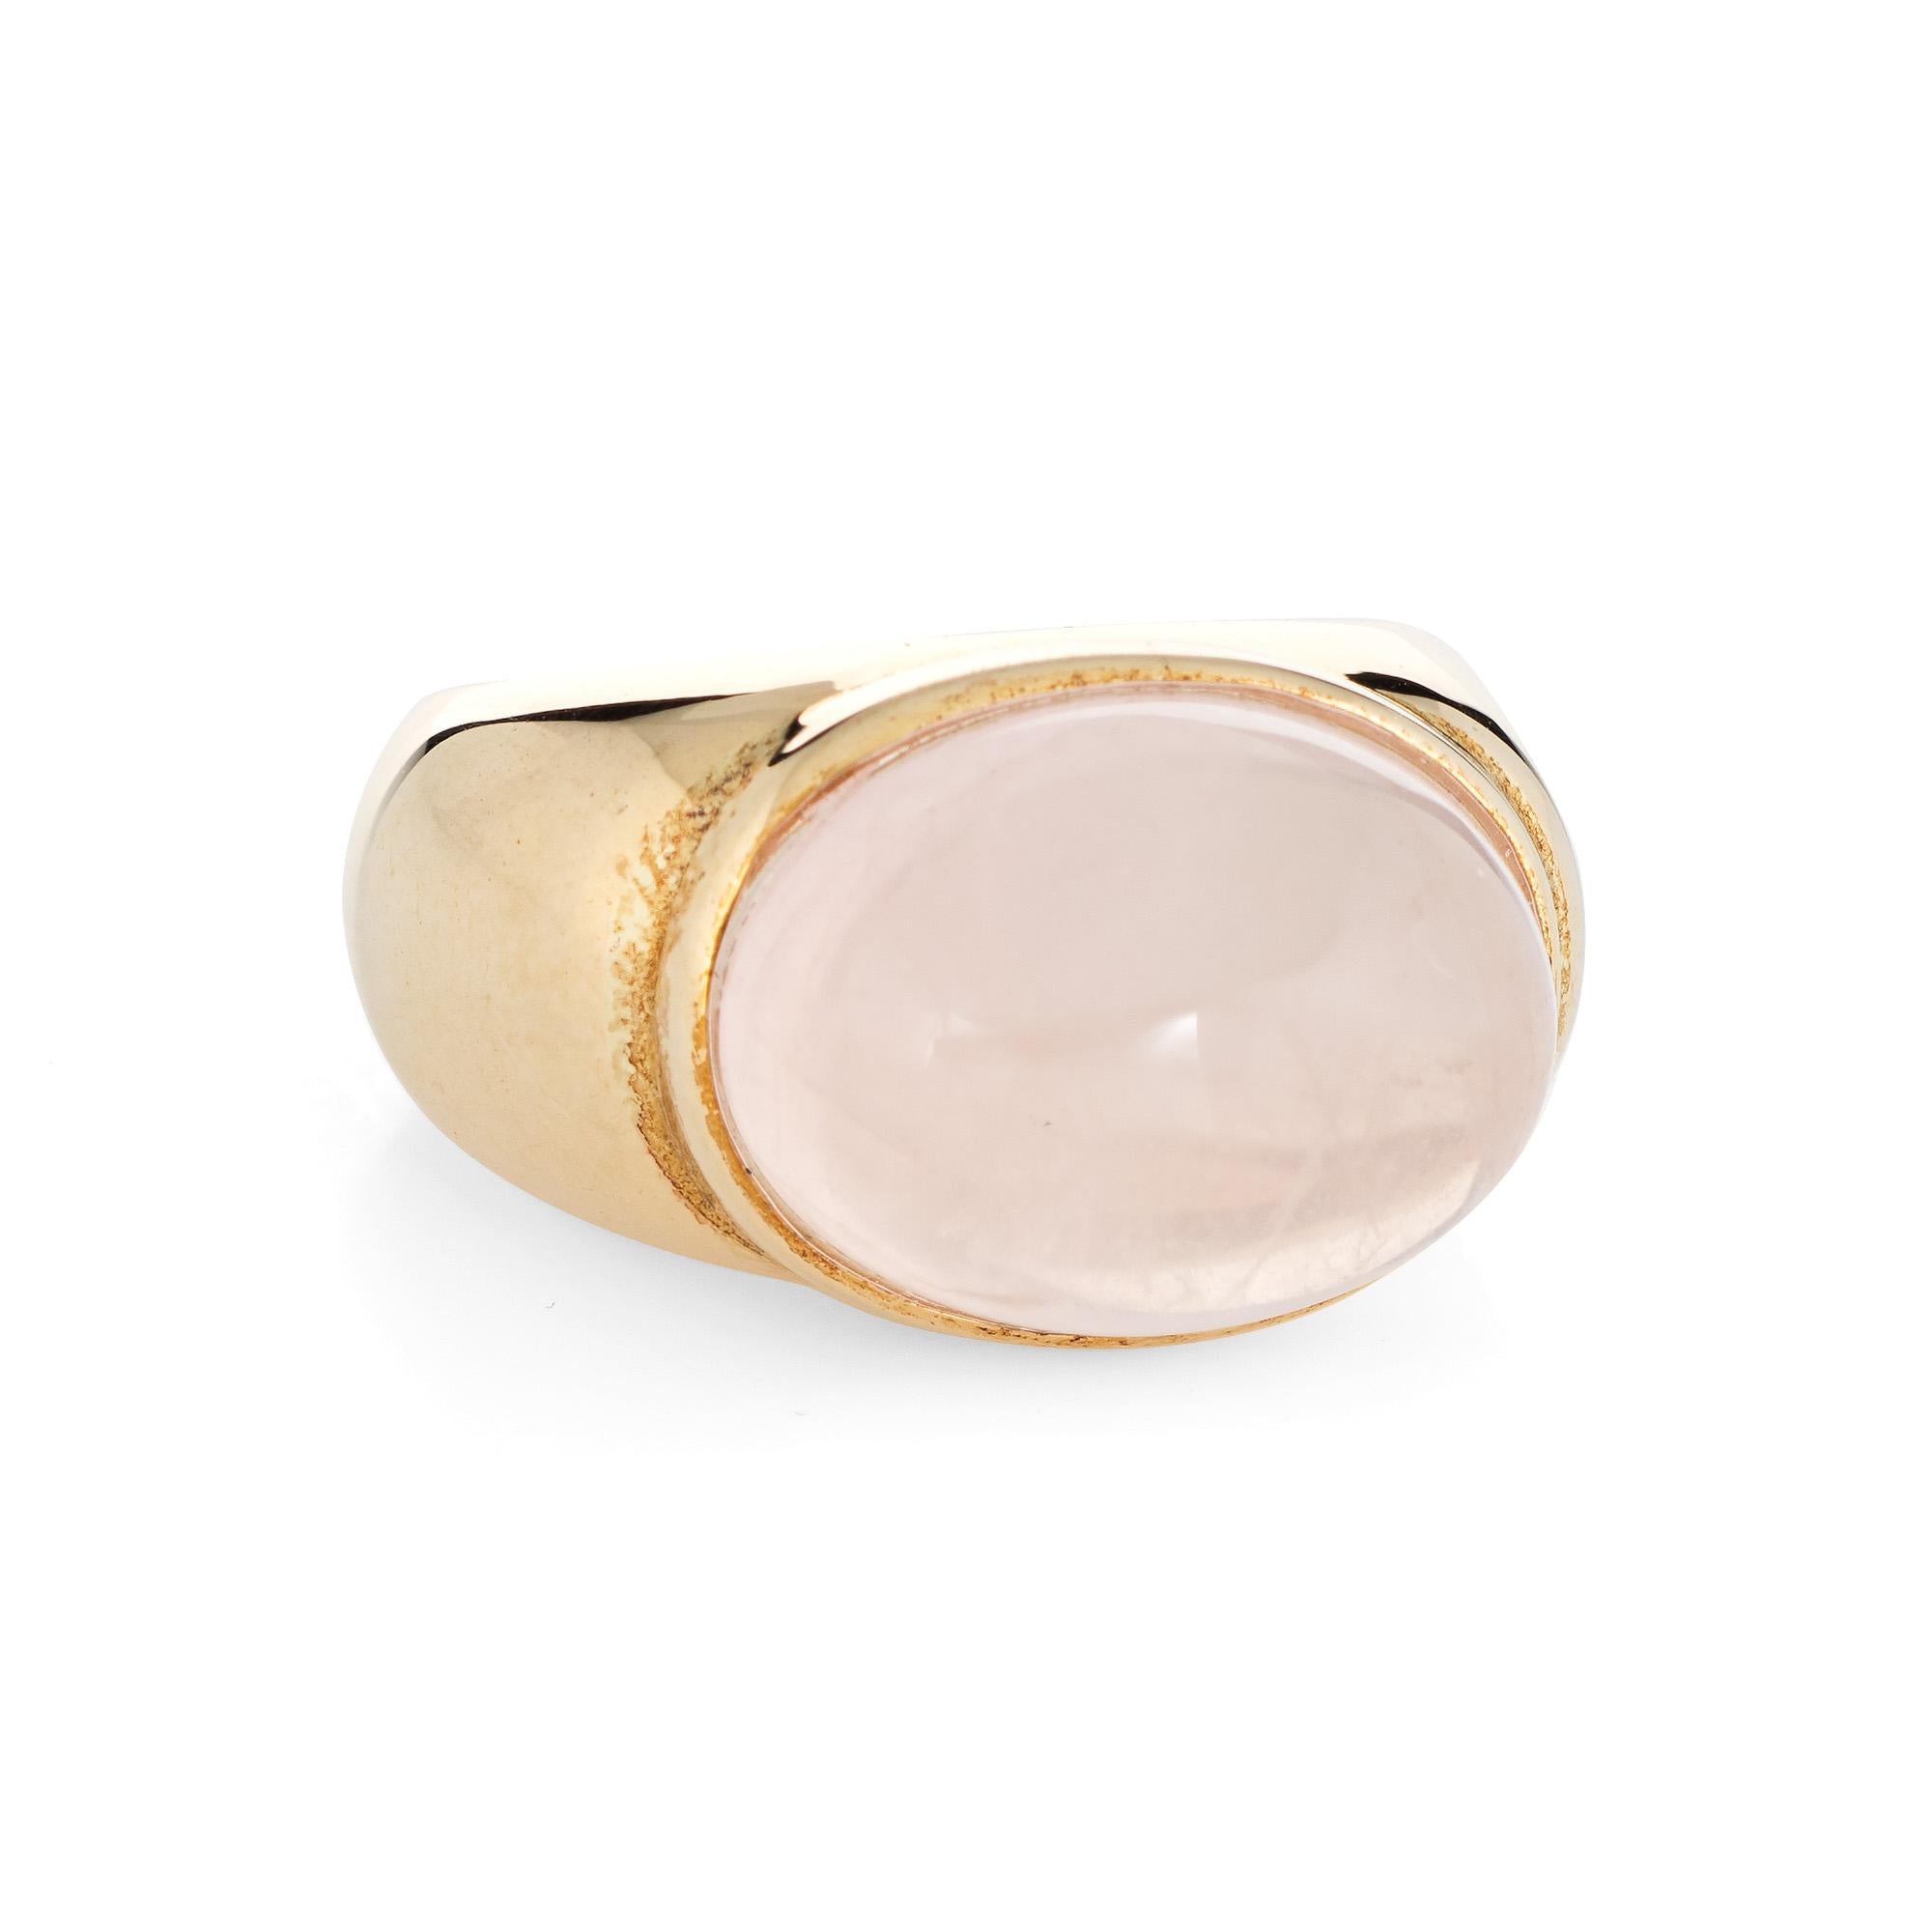 Stylish Faraone Mennella cocktail ring crafted in 14 karat yellow gold. 

Rose Quartz cabochon measures 16mm x 12mm (estimated at 12 carats). The rose quartz is in excellent condition and free of cracks or chips. 

The light pink hued rose quartz